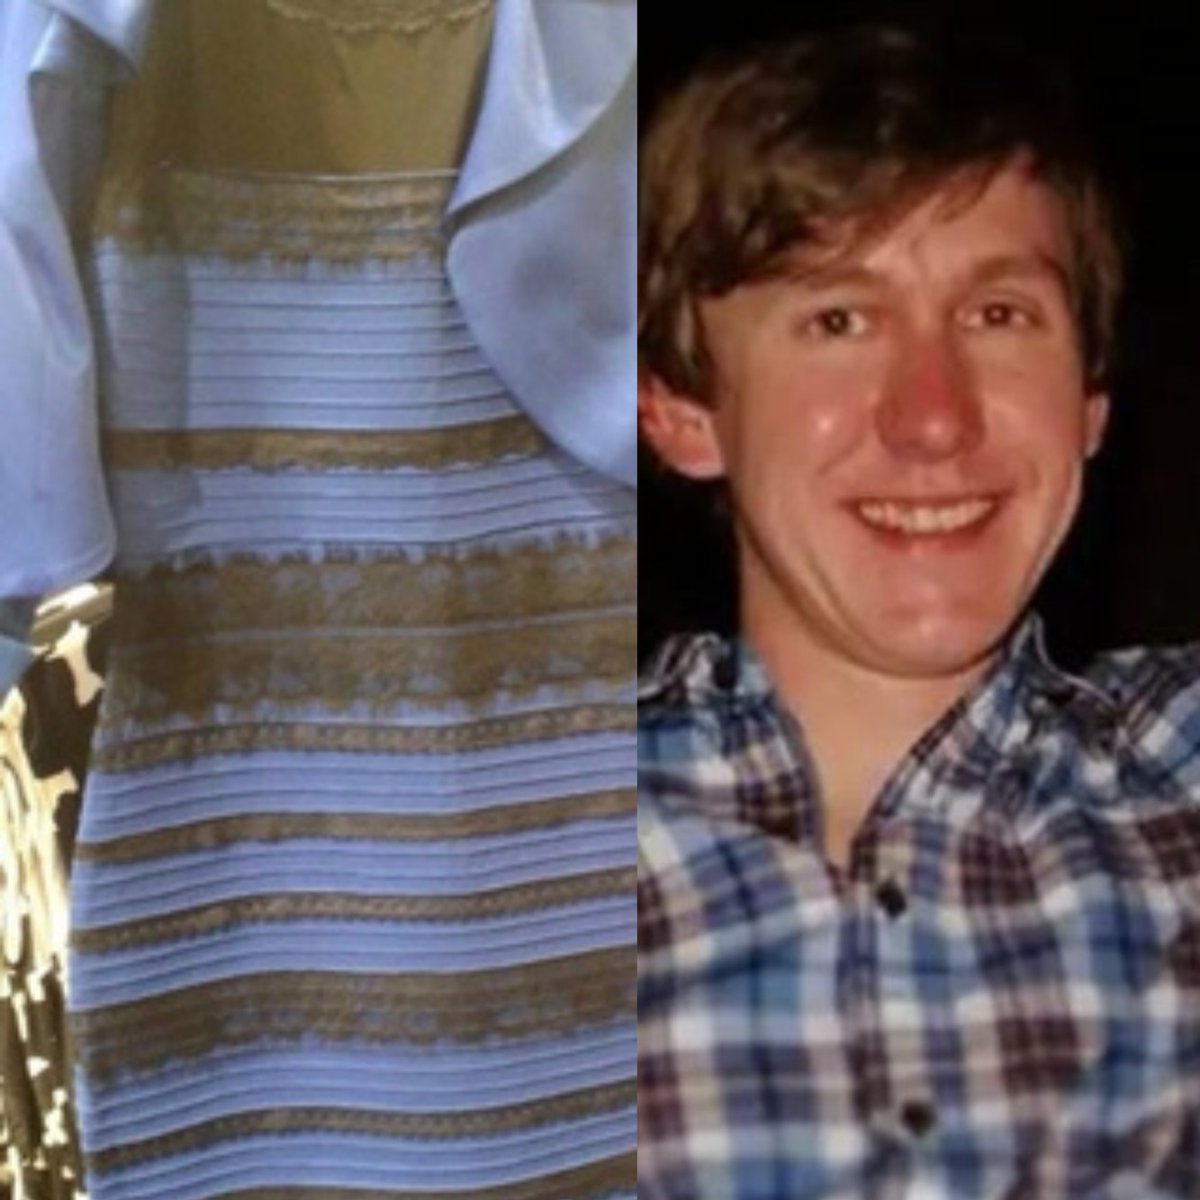 The man behind the viral blue and black/white and gold dress has pleaded guilty to attacking his wife: bit.ly/3WAeoD9